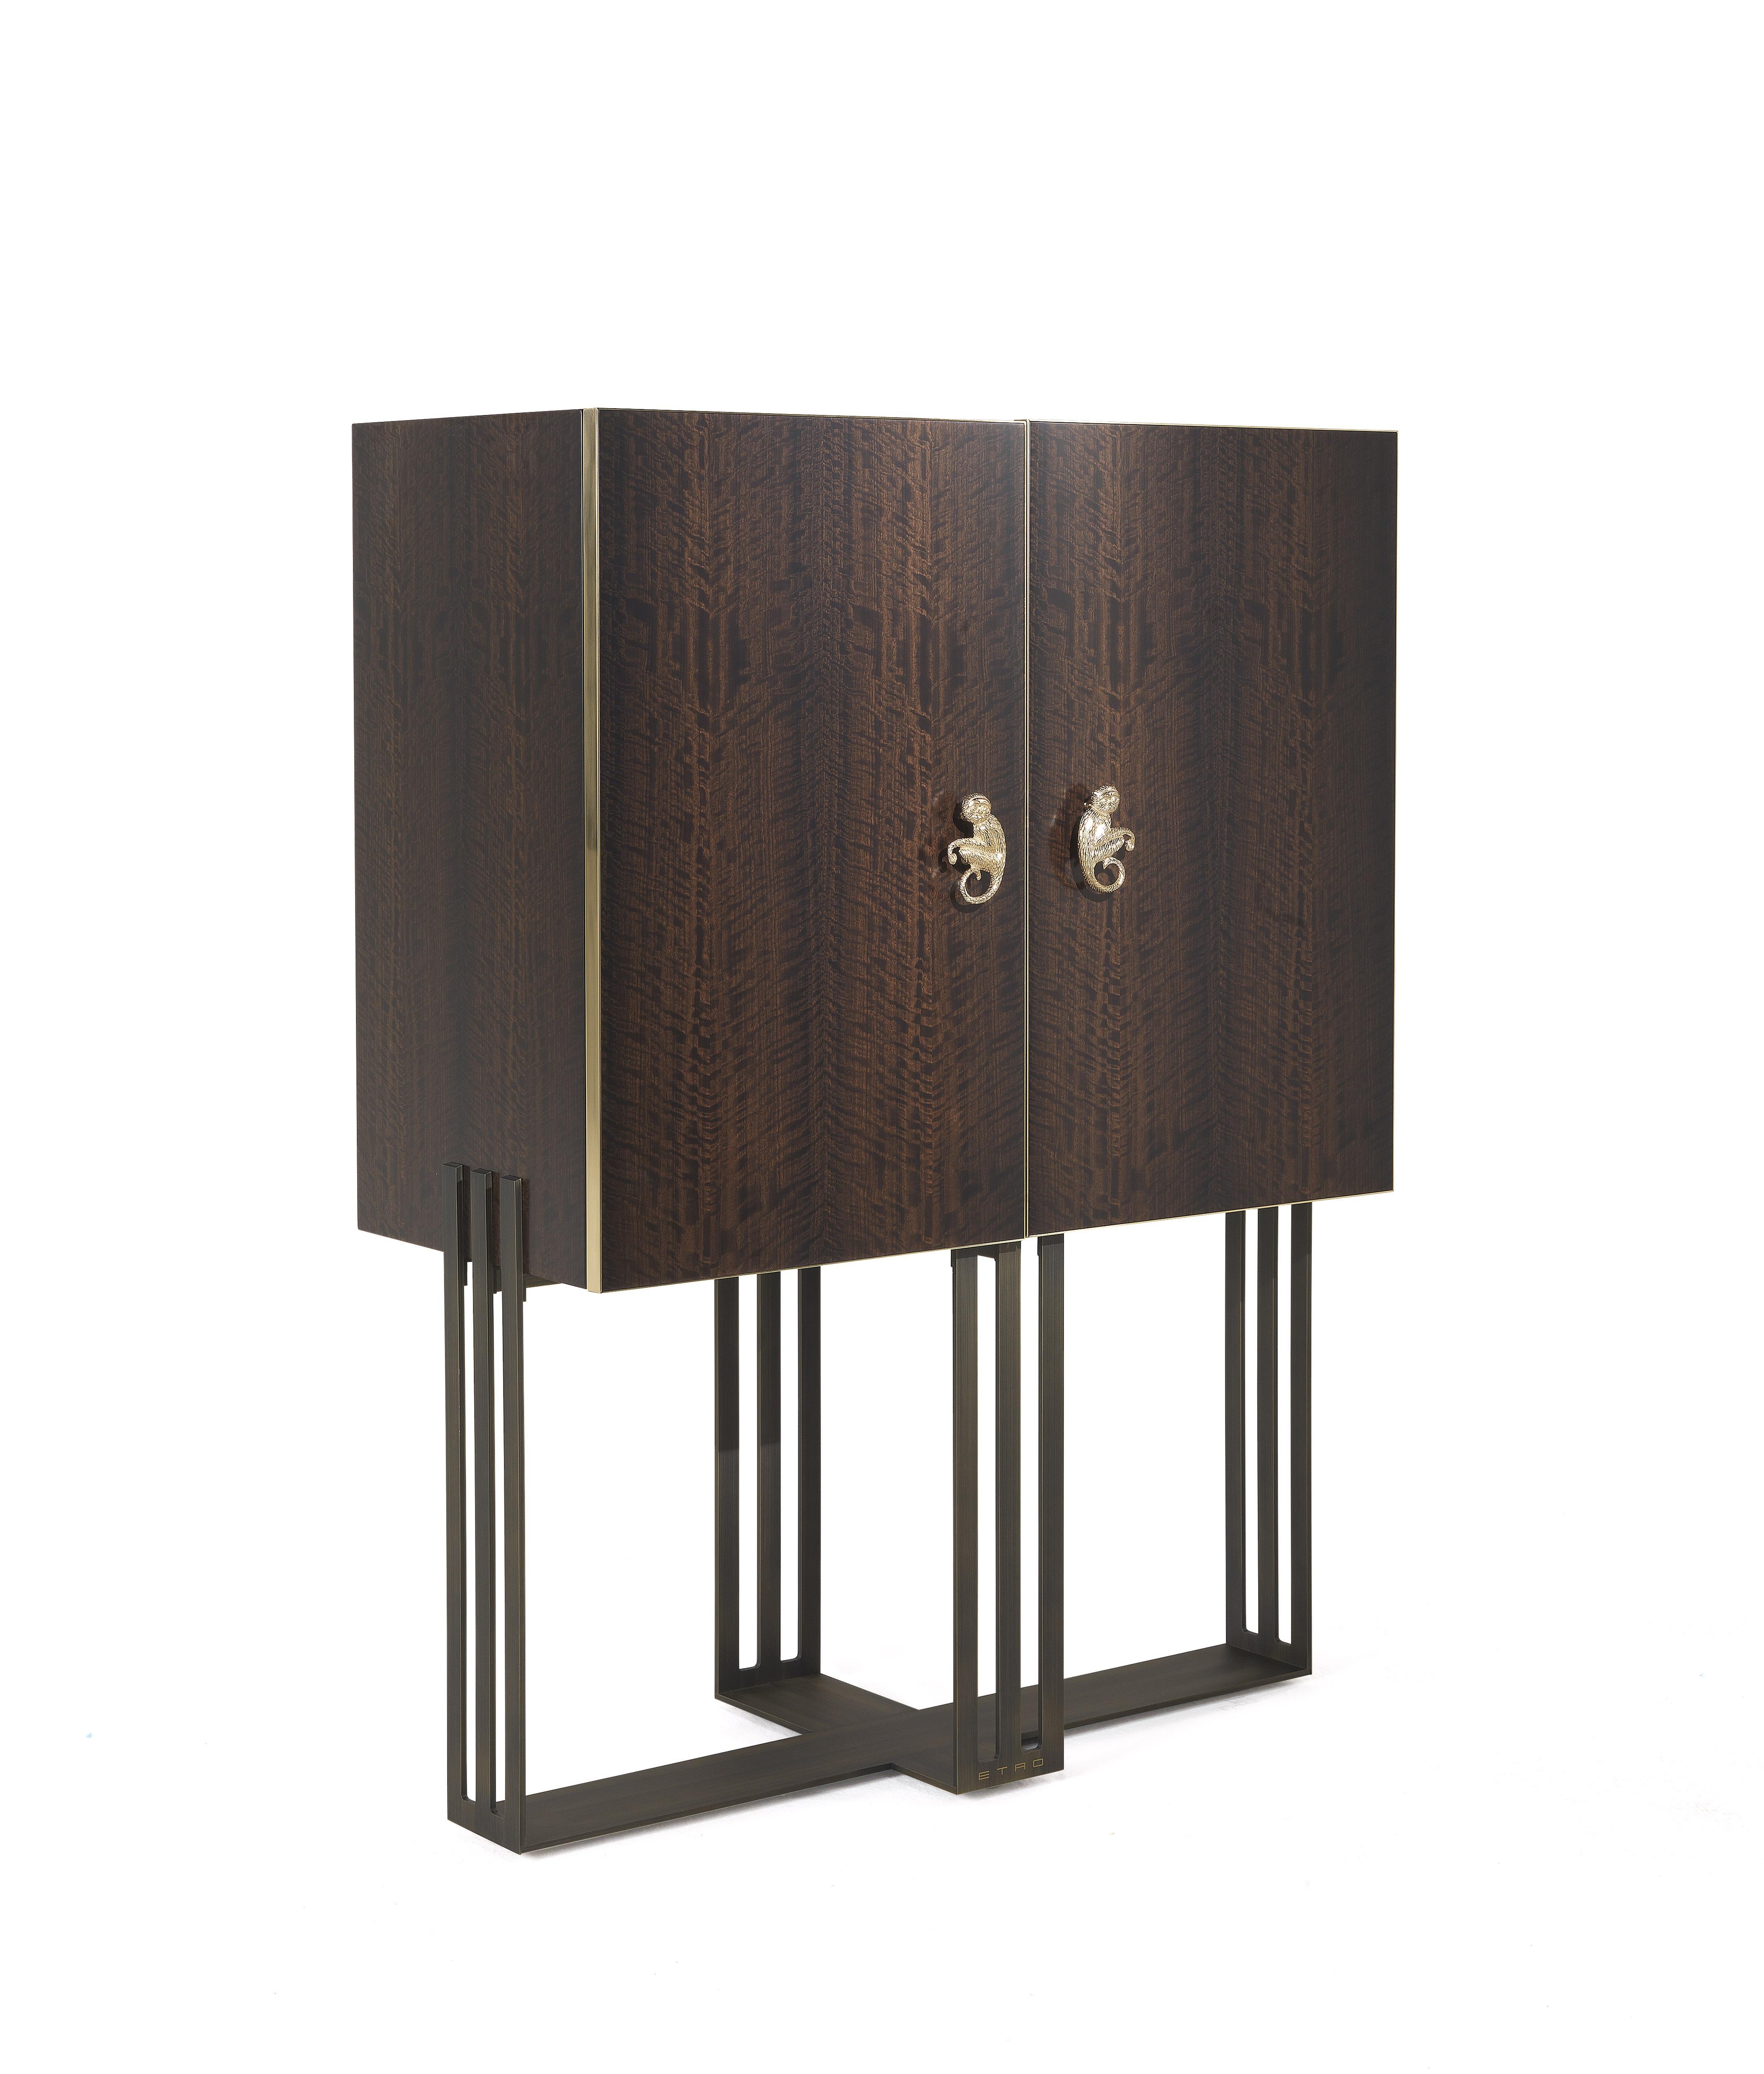 The sober and elegant forms of Klee cabinet hide a surprising profusion of original details. From the little monkey, symbol of Etro’s creative universe, to the base in patinated bronze that incorporates the initials of the brand, to the precious